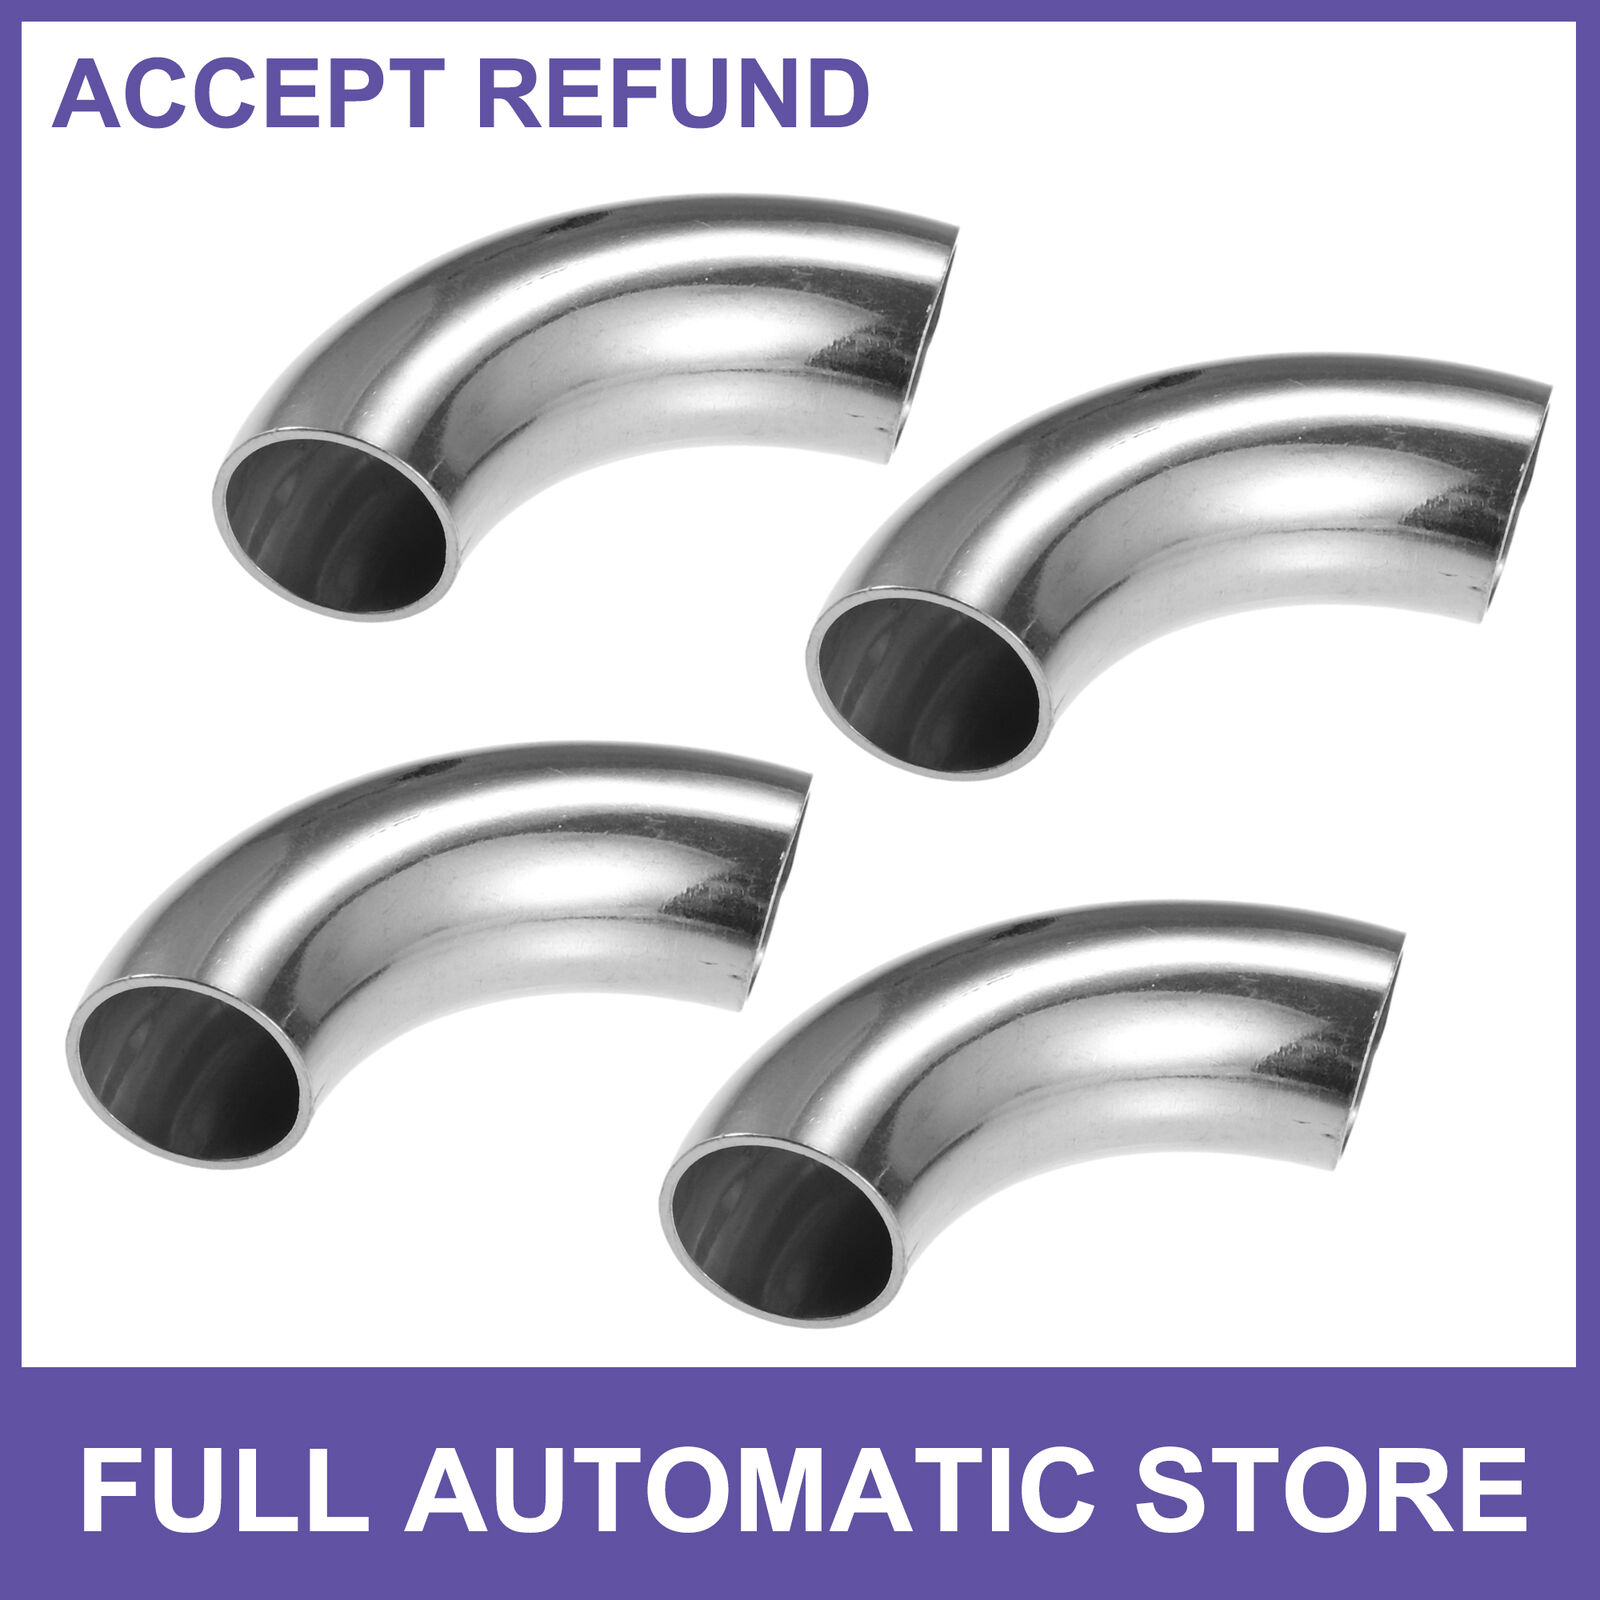 FOUR 1 Inch 90 Degree Mandrel Bend Elbow Bend Tube Exhaust Elbow Pipe Universal